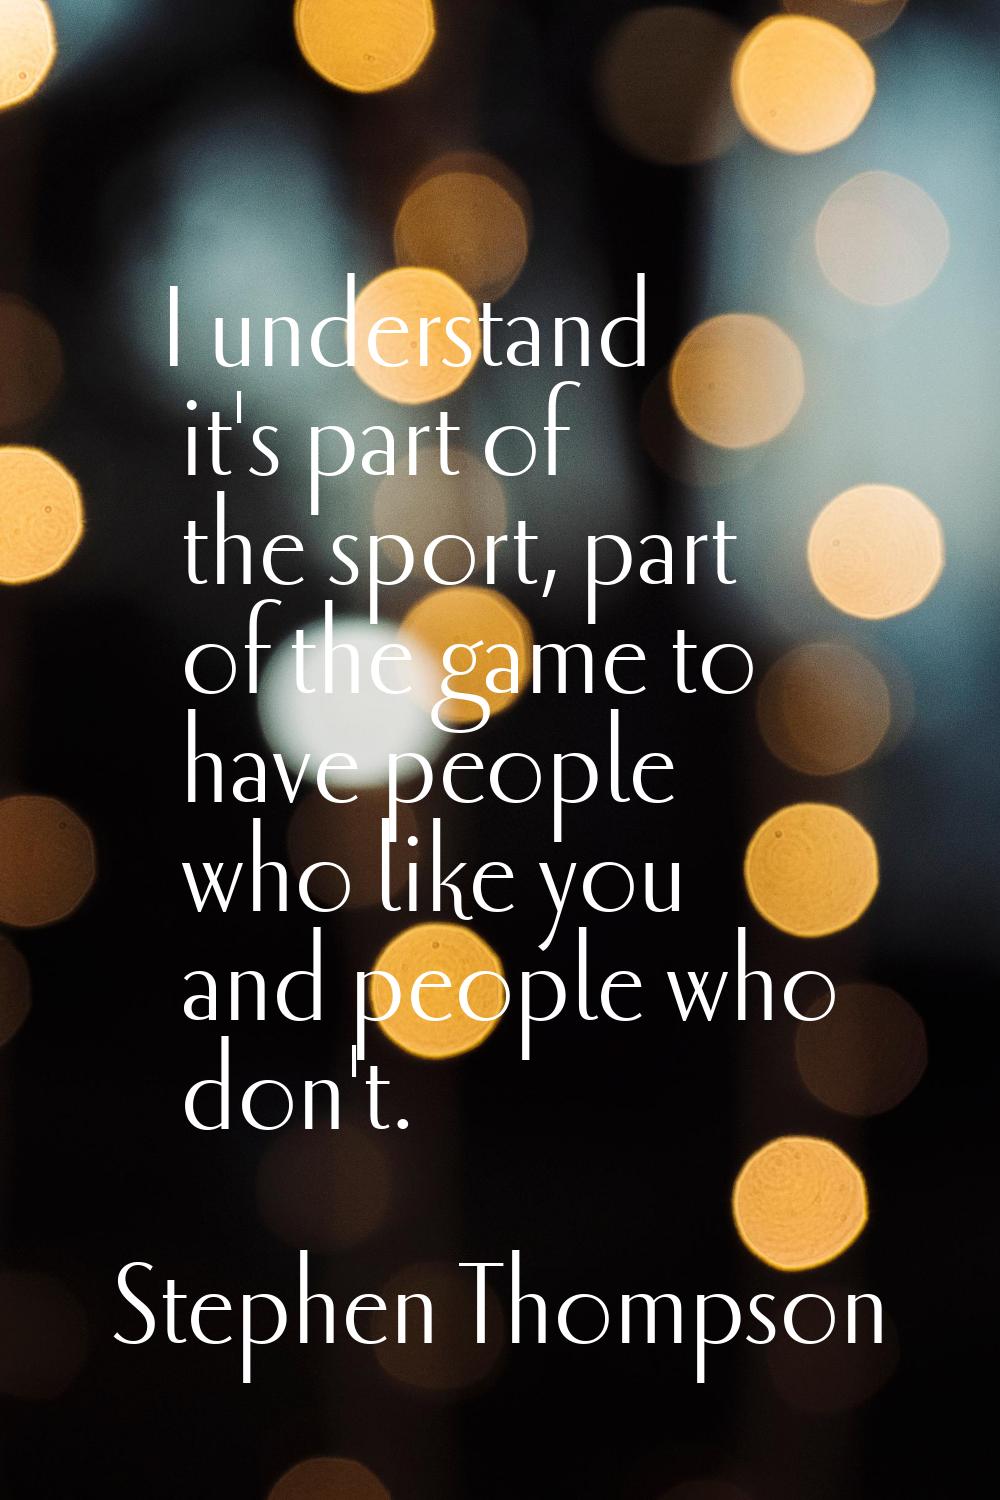 I understand it's part of the sport, part of the game to have people who like you and people who do